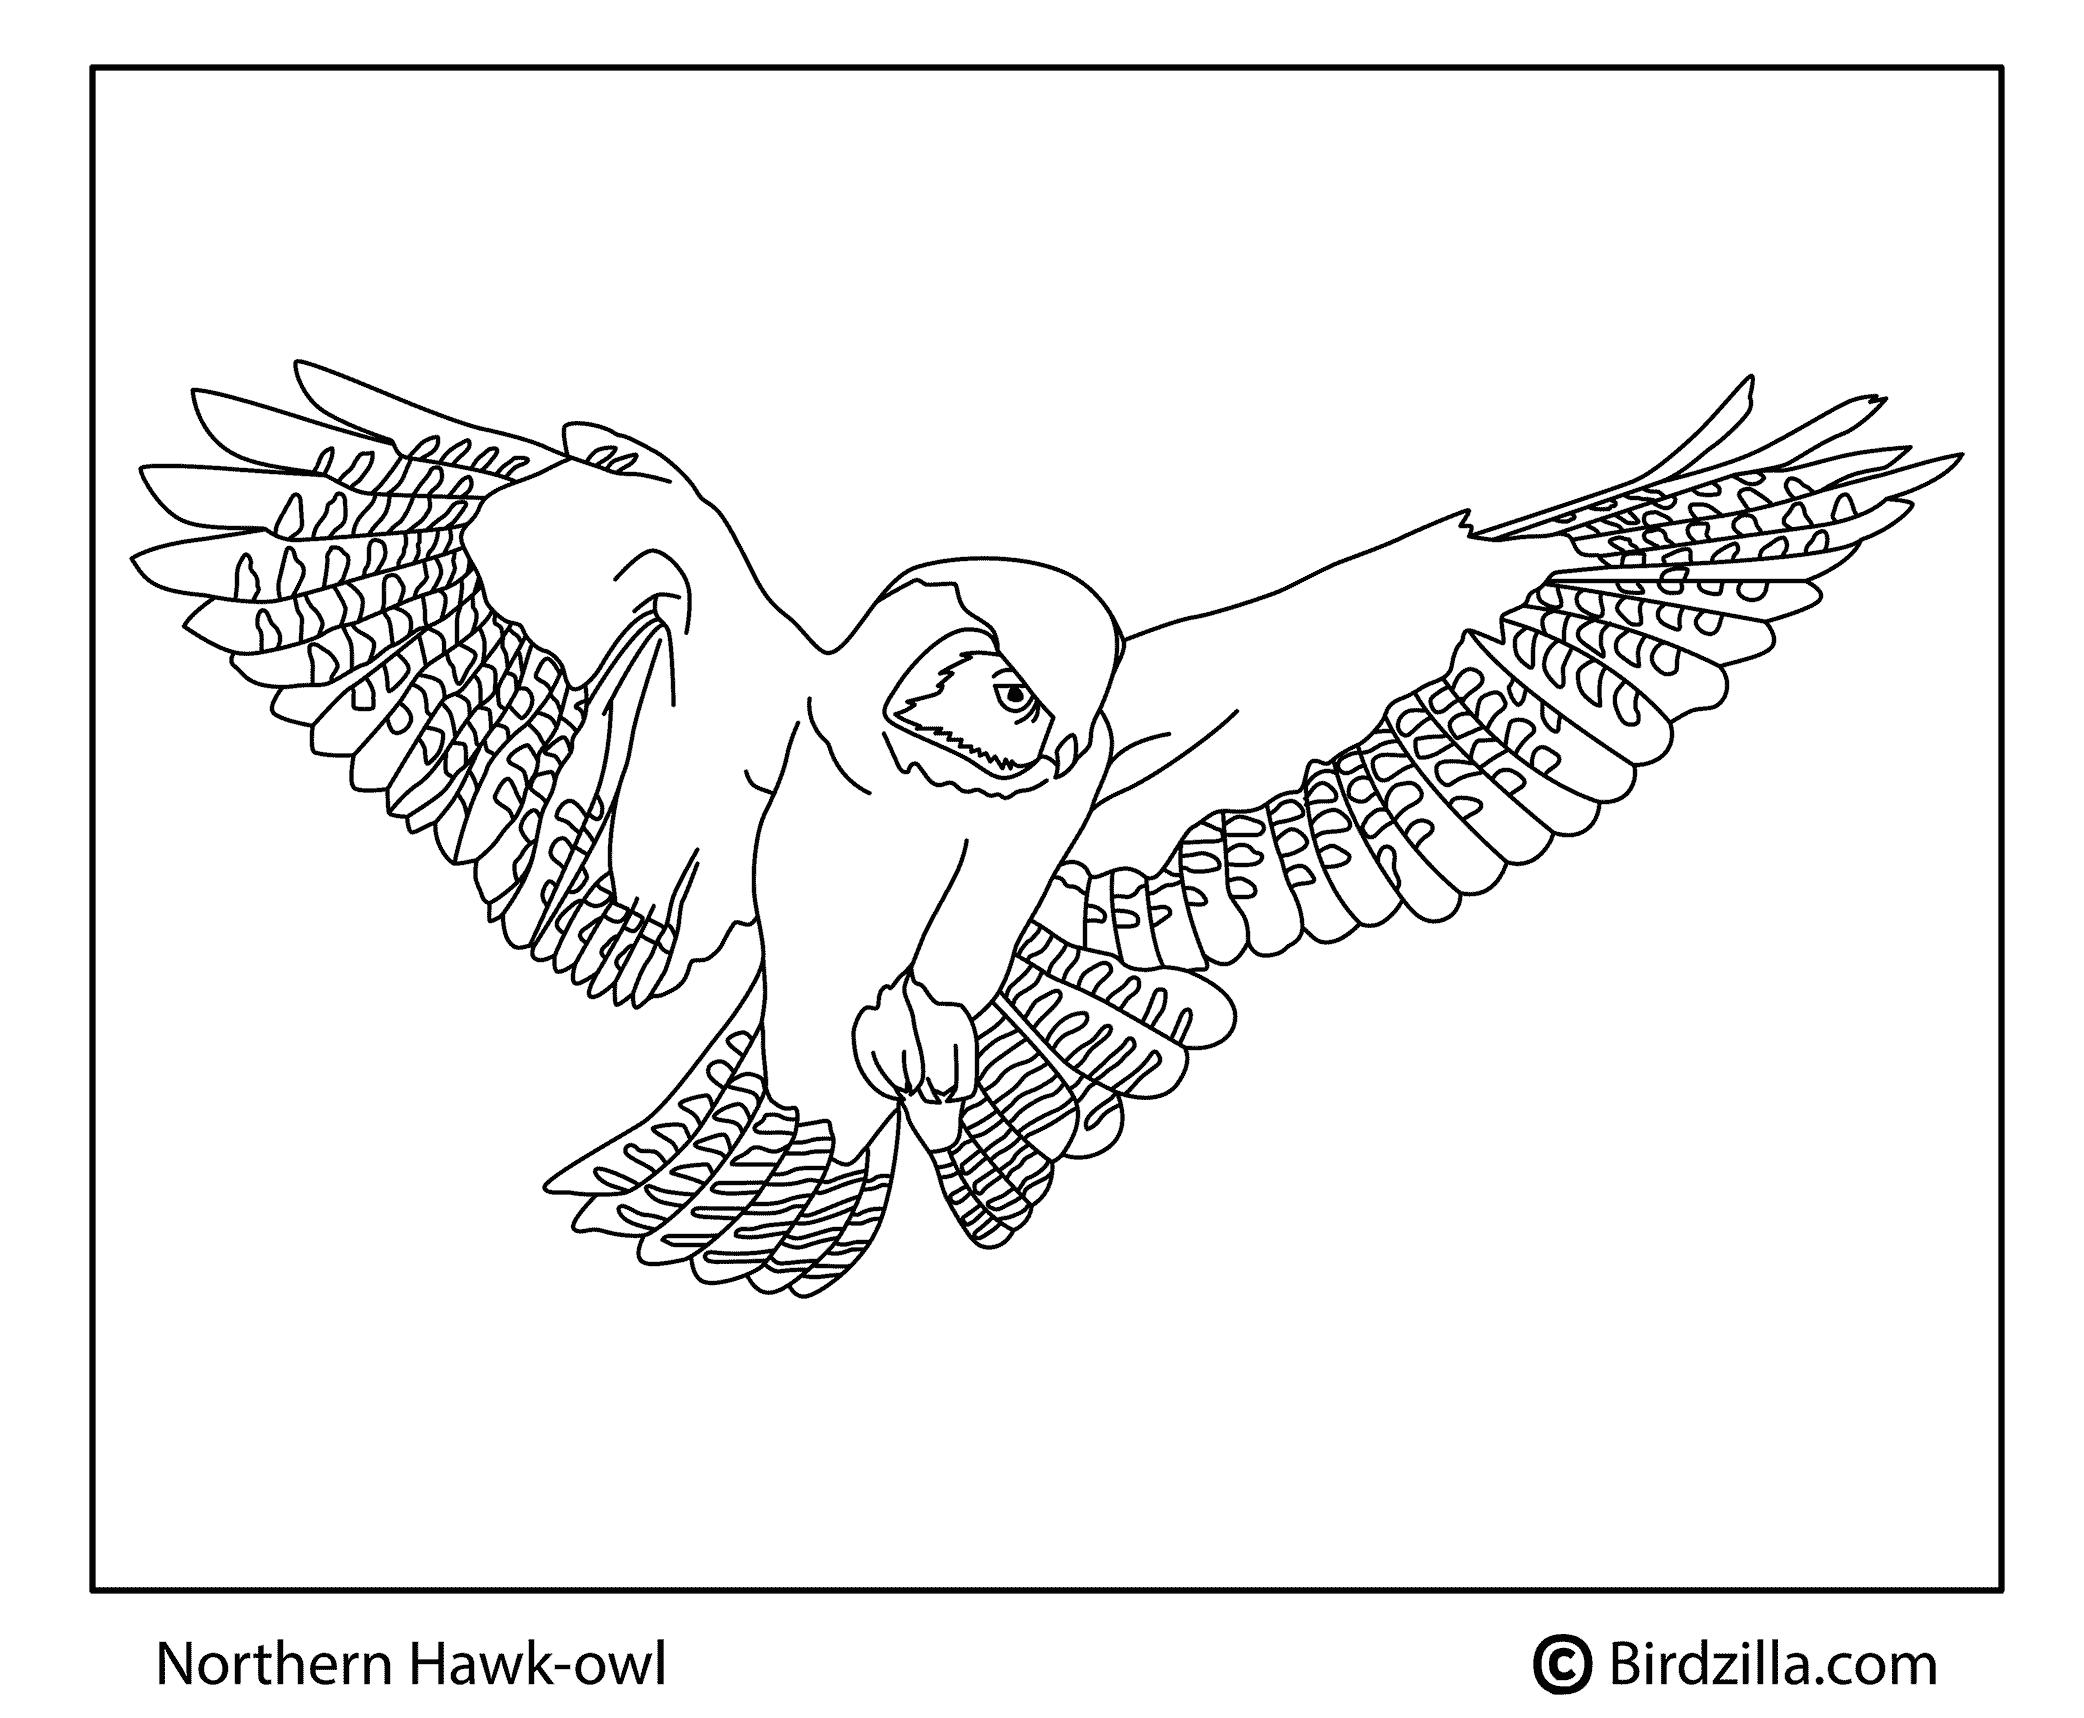 Northern Hawk Owl coloring page